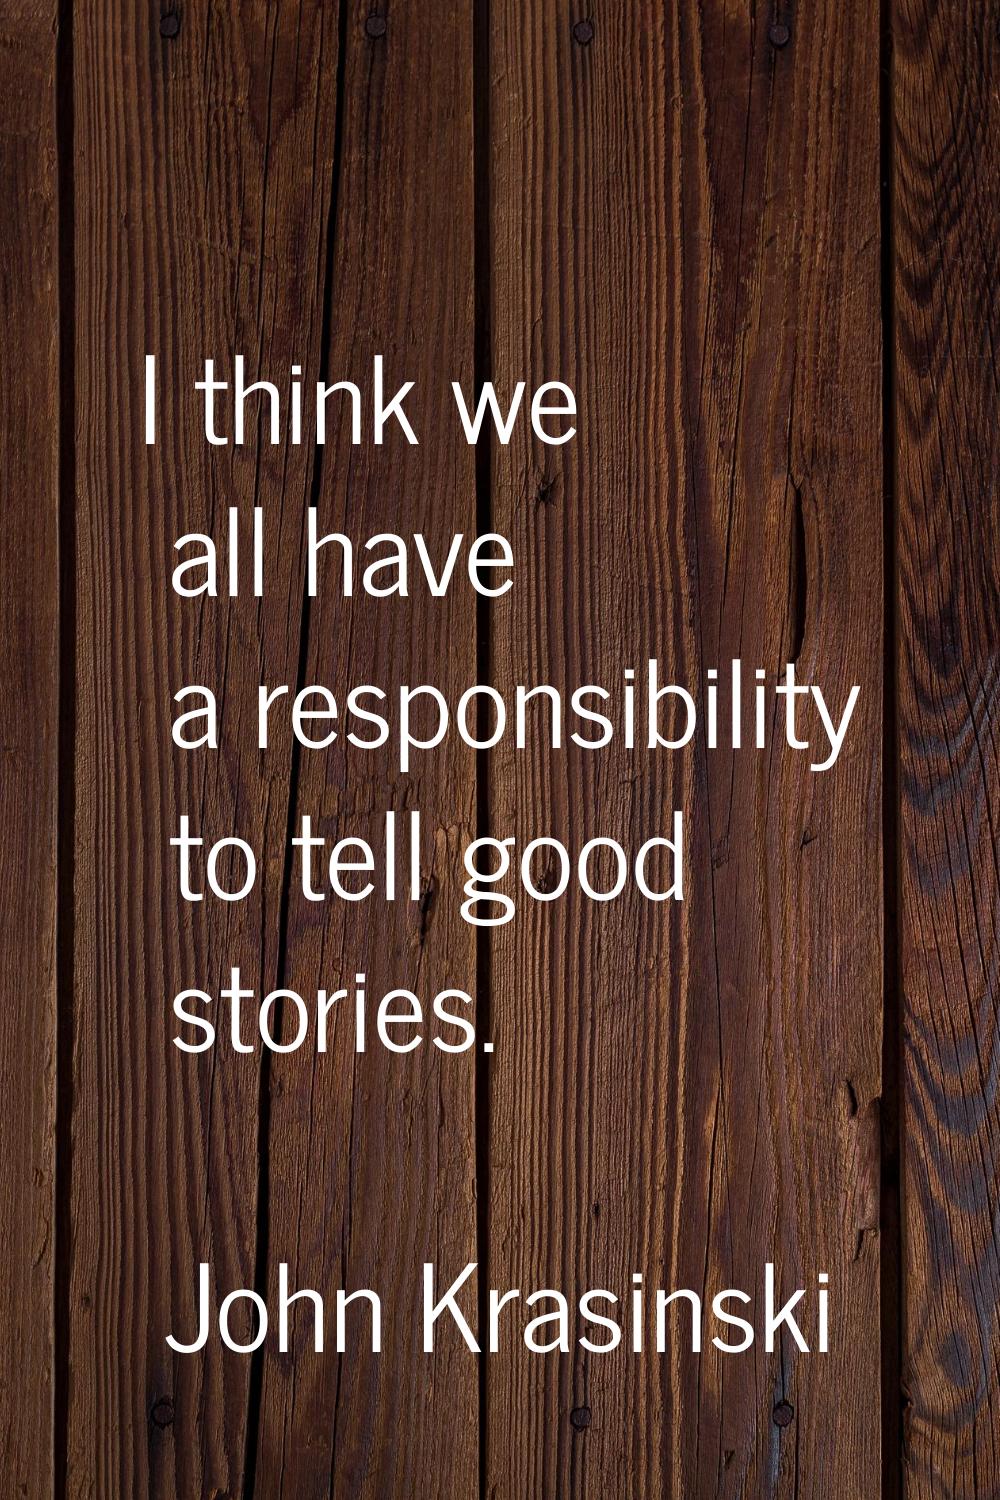 I think we all have a responsibility to tell good stories.